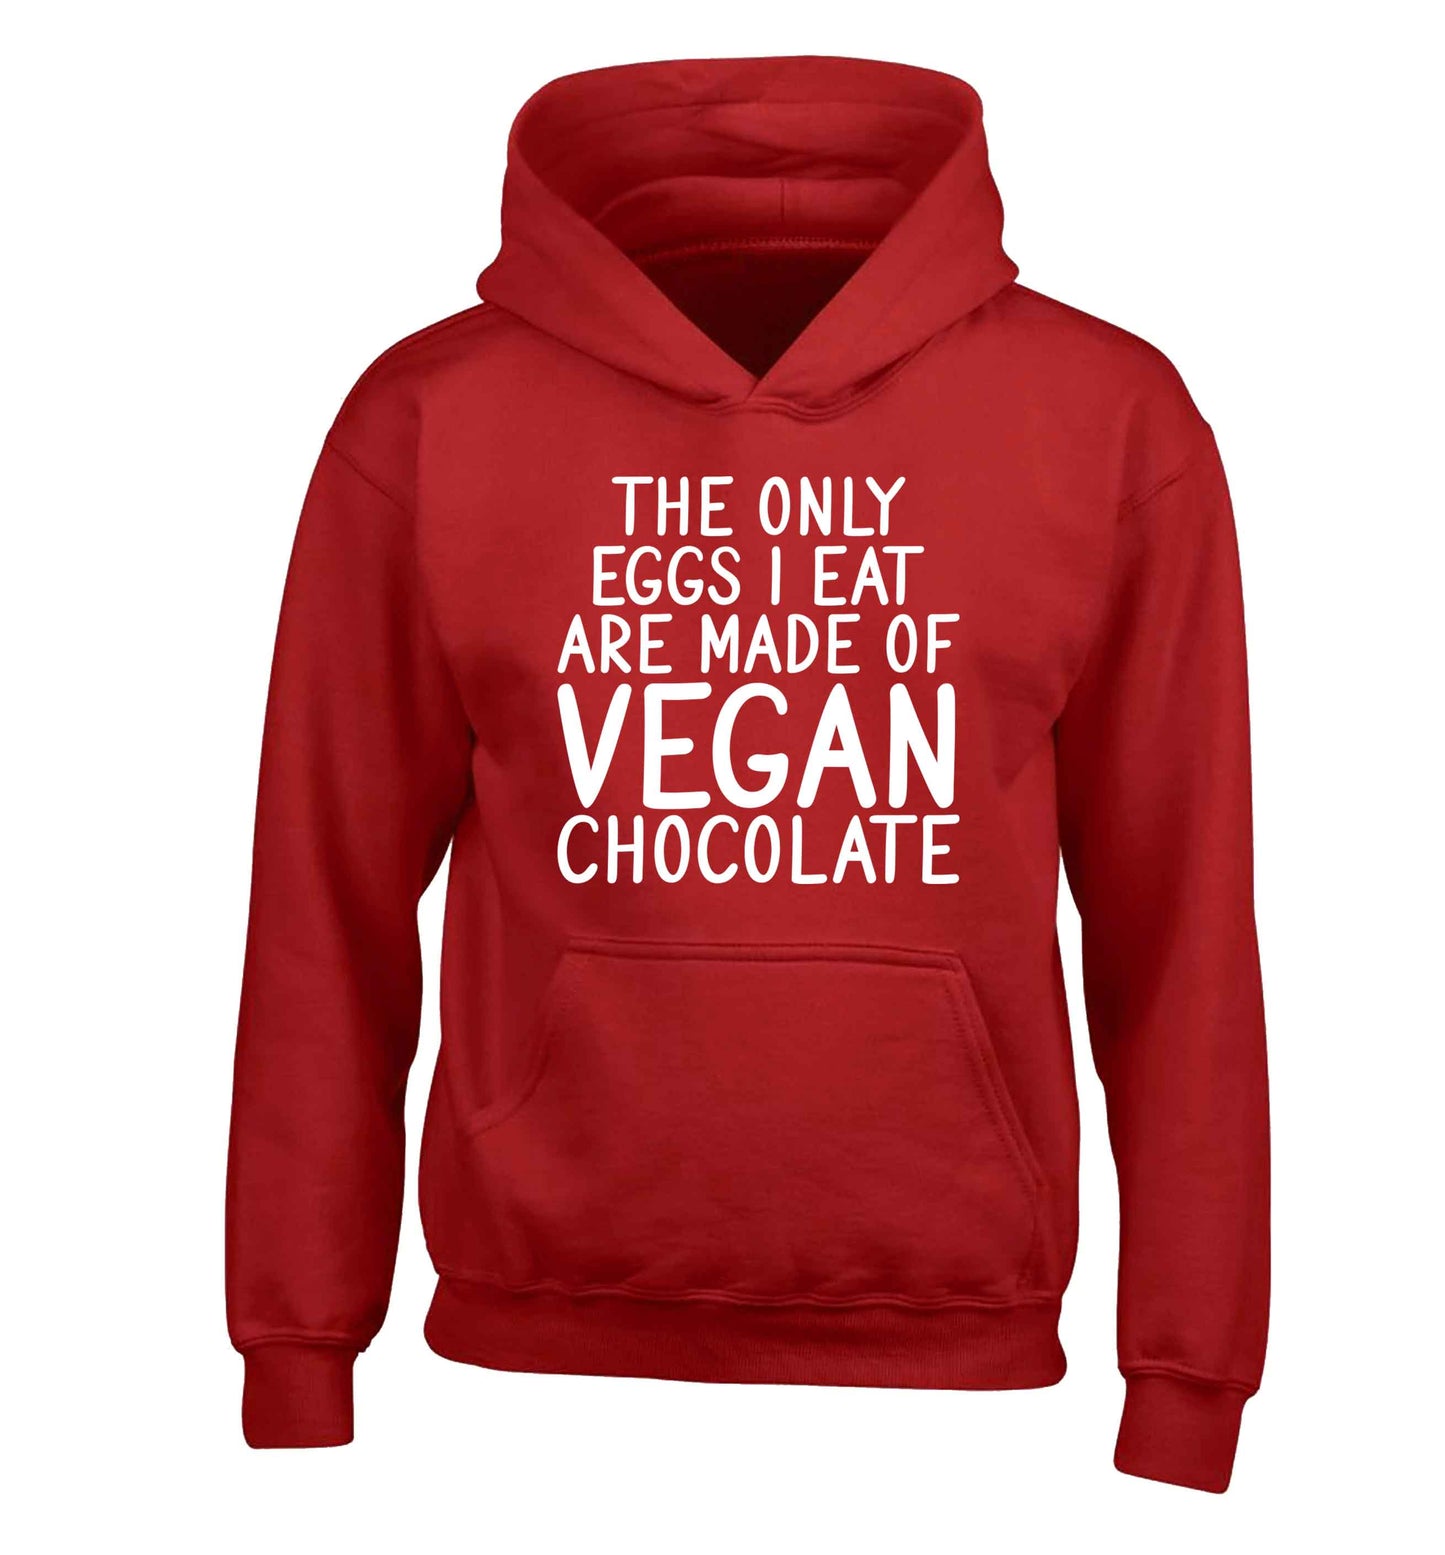 The only eggs I eat are made of vegan chocolate children's red hoodie 12-13 Years